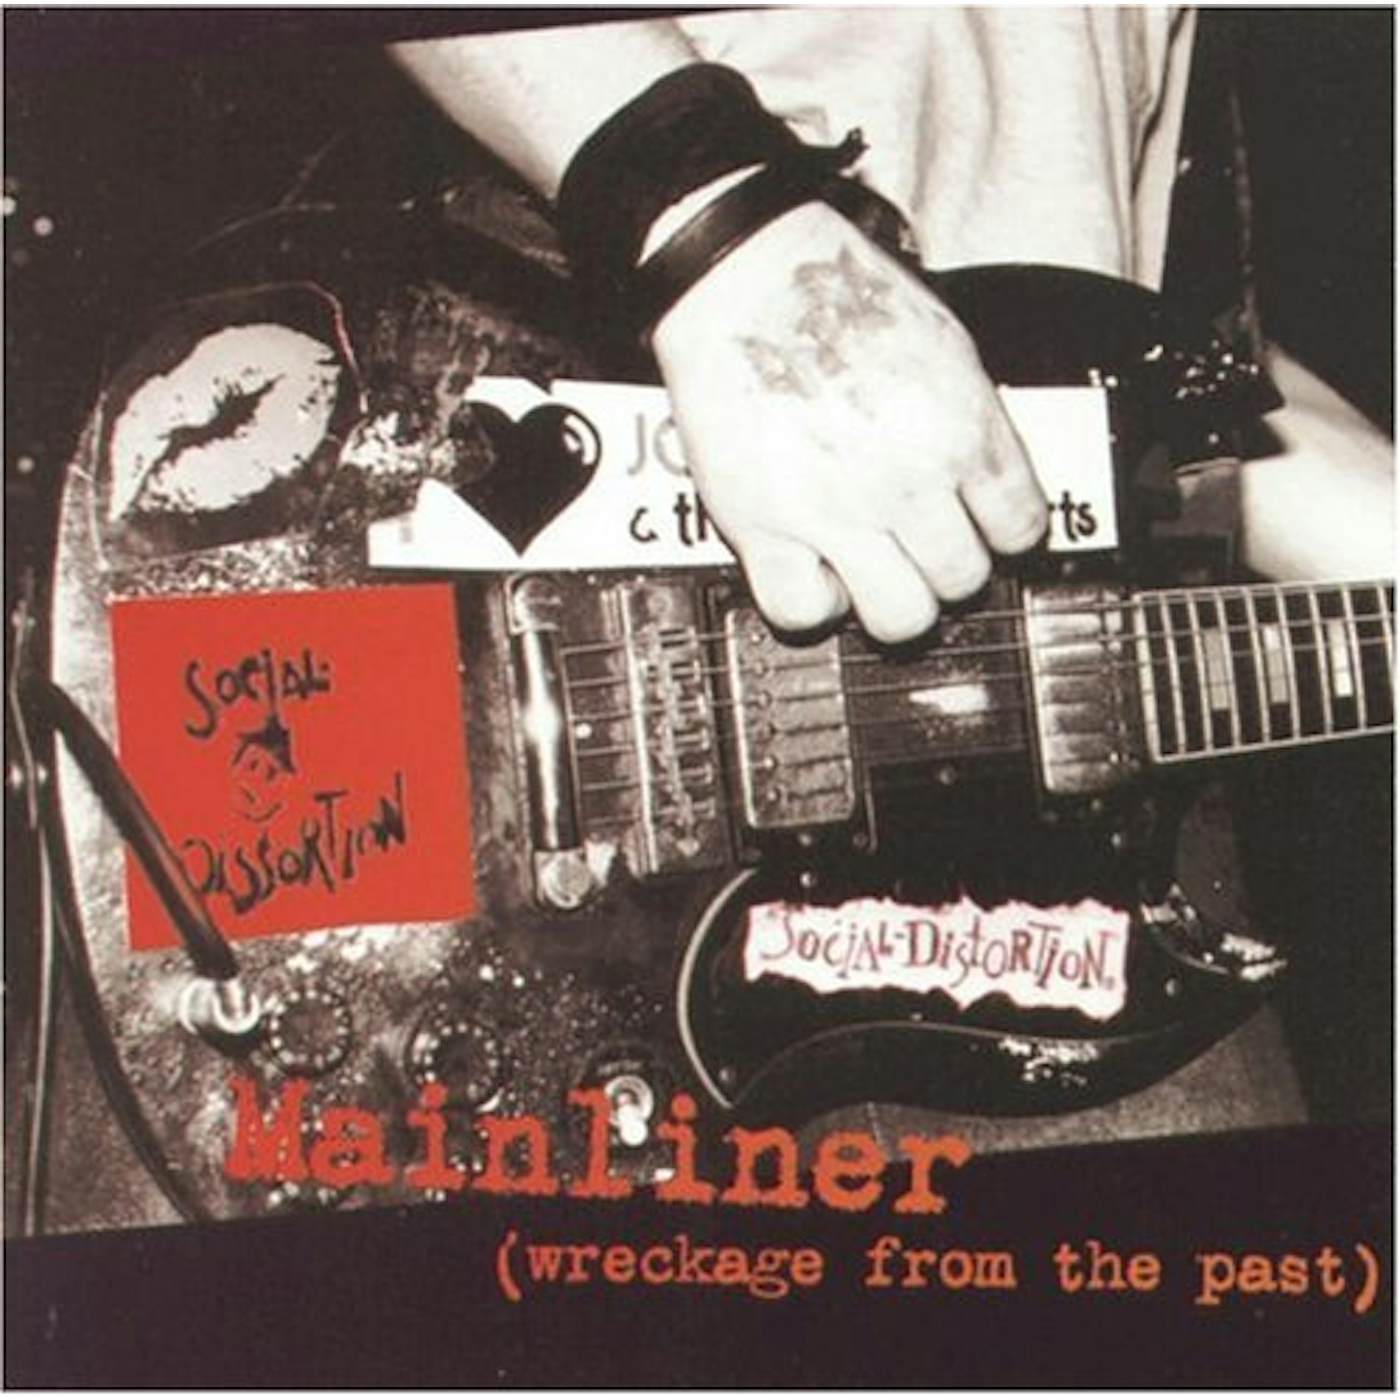 Social Distortion MAINLINER (WRECKAGE OF THE PAST) CD